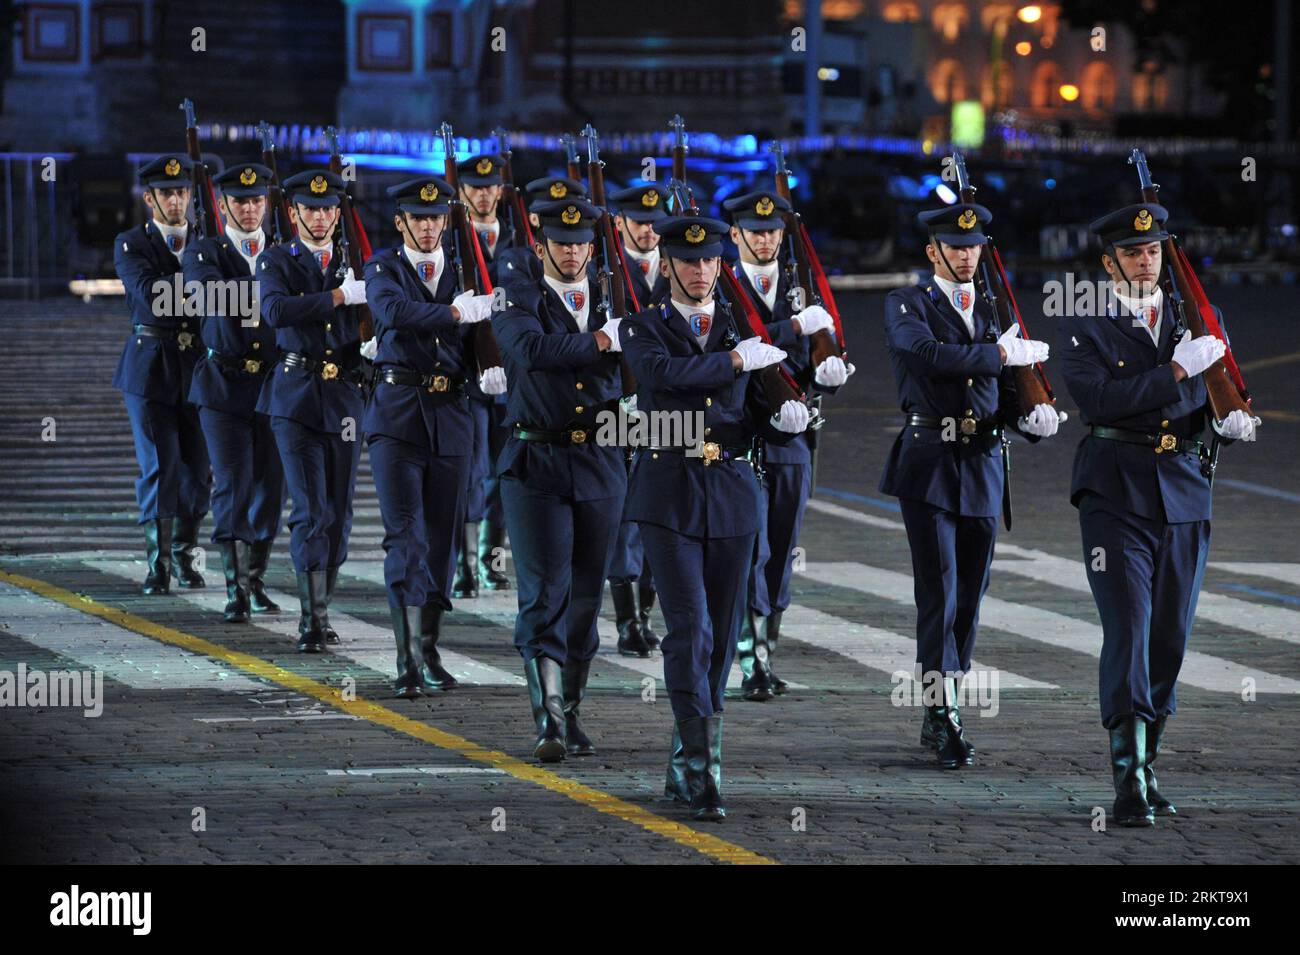 Bildnummer: 58416192  Datum: 01.09.2012  Copyright: imago/Xinhua  MOSCOW,  2012 (Xinhua) -- A team parades during the International Military Music Festival at Red Square in Moscow, on Sept. 1, 2012. Military bands from different countries participate in the annual tattoo. (Xinhua/Pavel) (lr) RUSSIA-MOSCOW-INTERNATIONAL MILITARY MUSIC FESTIVAL PUBLICATIONxNOTxINxCHN Gesellschaft Militär Musik Militärmusik Musikfestival Militärmusikfestival xas x0x premiumd 2012 quer     58416192 Date 01 09 2012 Copyright Imago XINHUA Moscow 2012 XINHUA a Team Parades during The International Military Music Fest Stock Photo